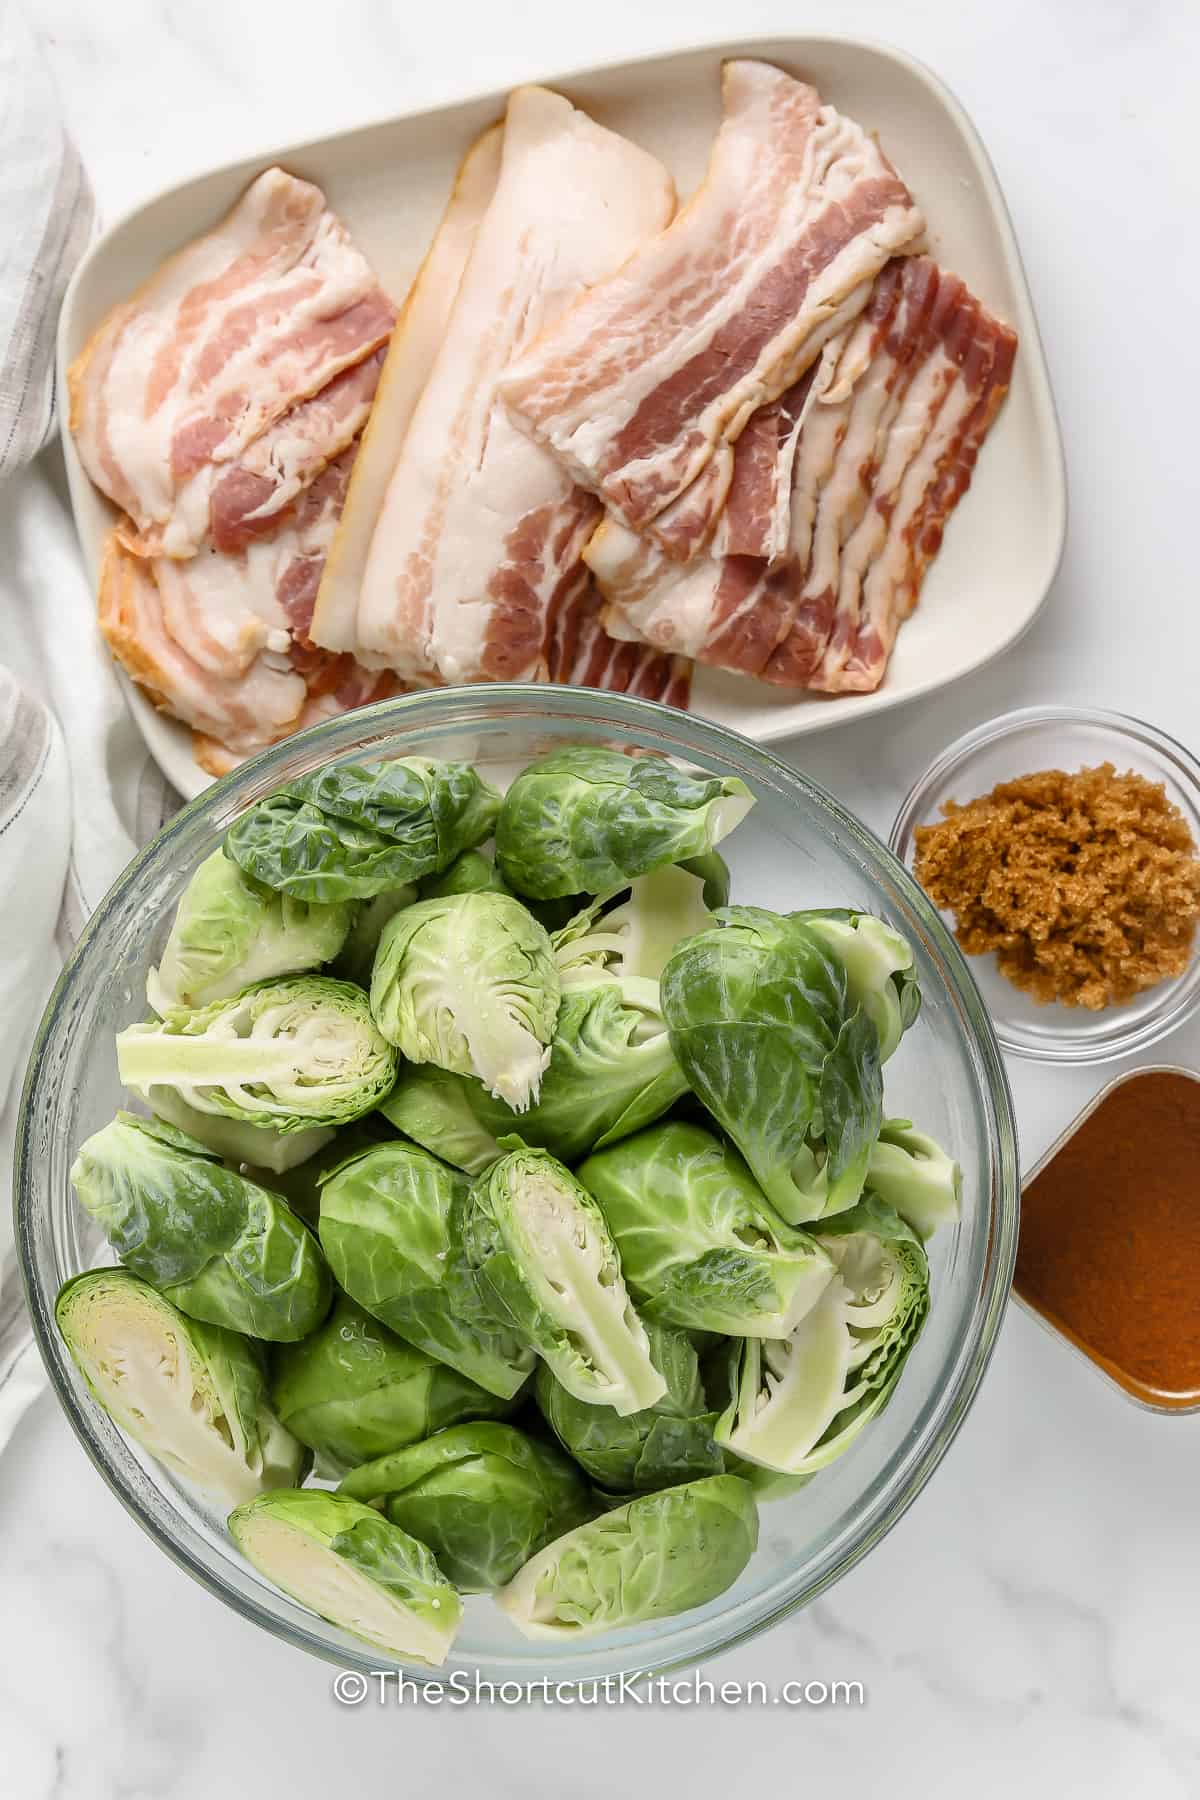 ingredients assembled to make bacon wrapped brussels sprouts